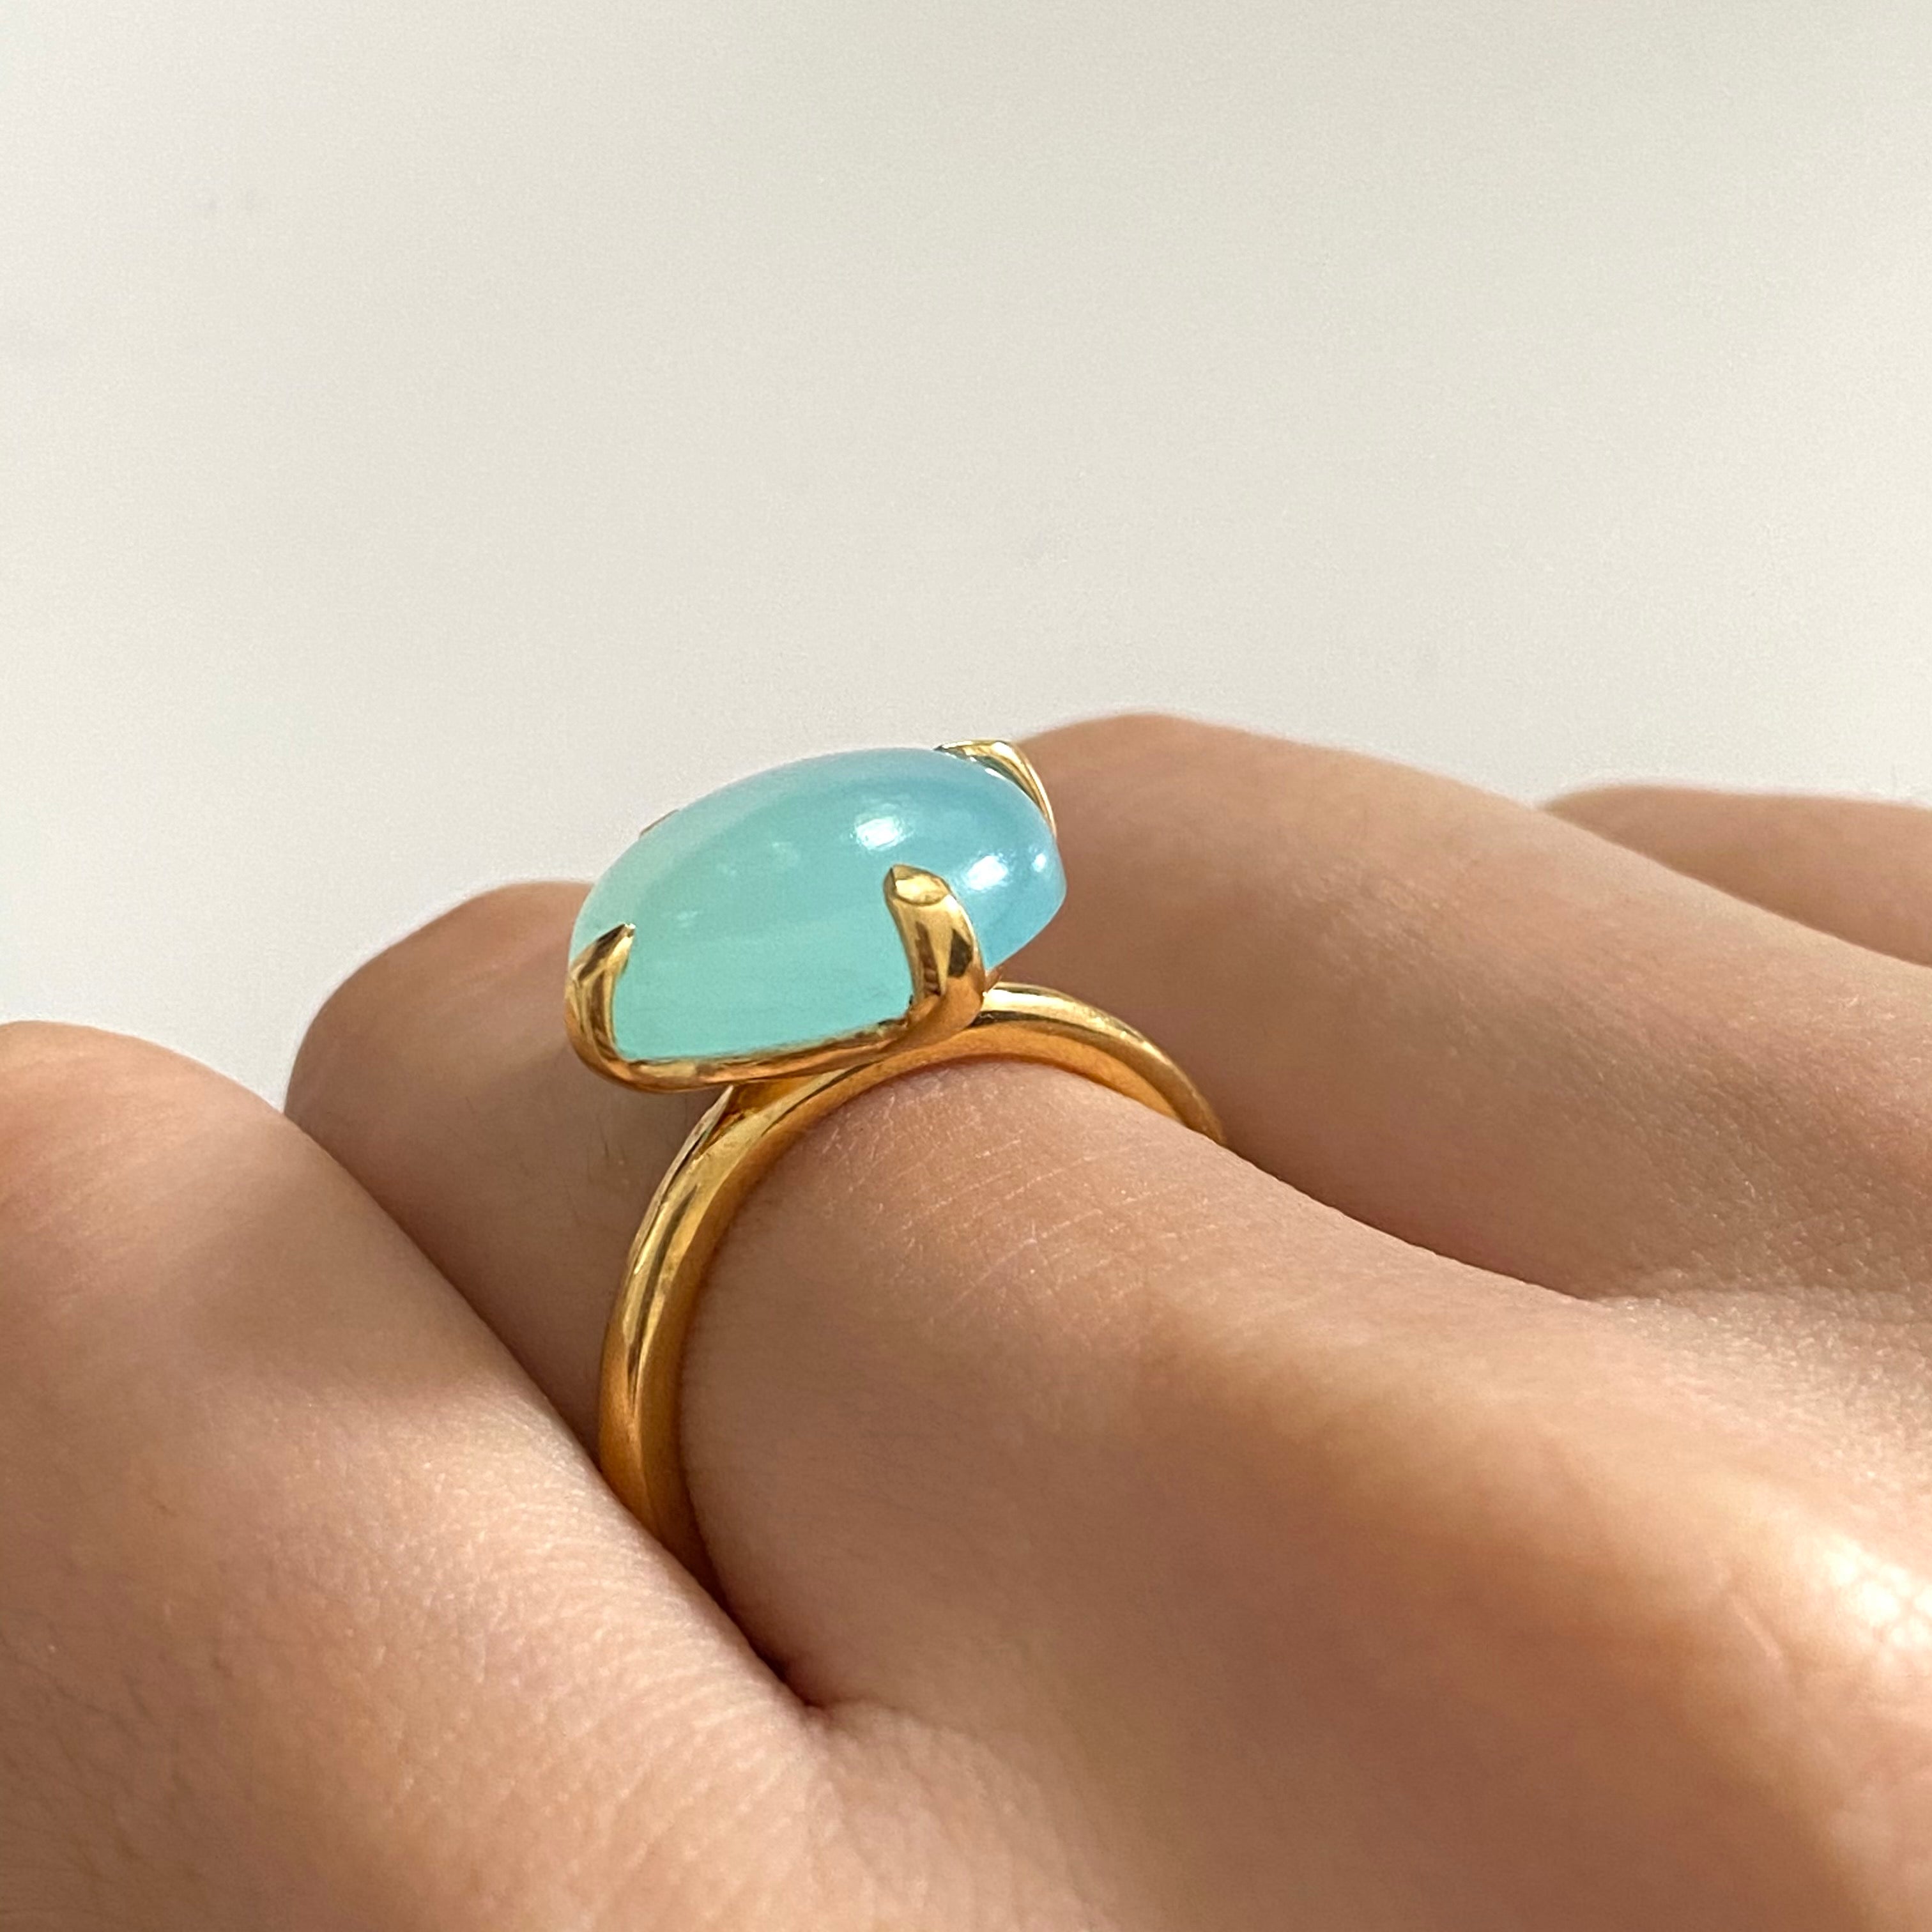 Round Cabochon Aqua Chalcedony Ring in Gold Plated Sterling Silver